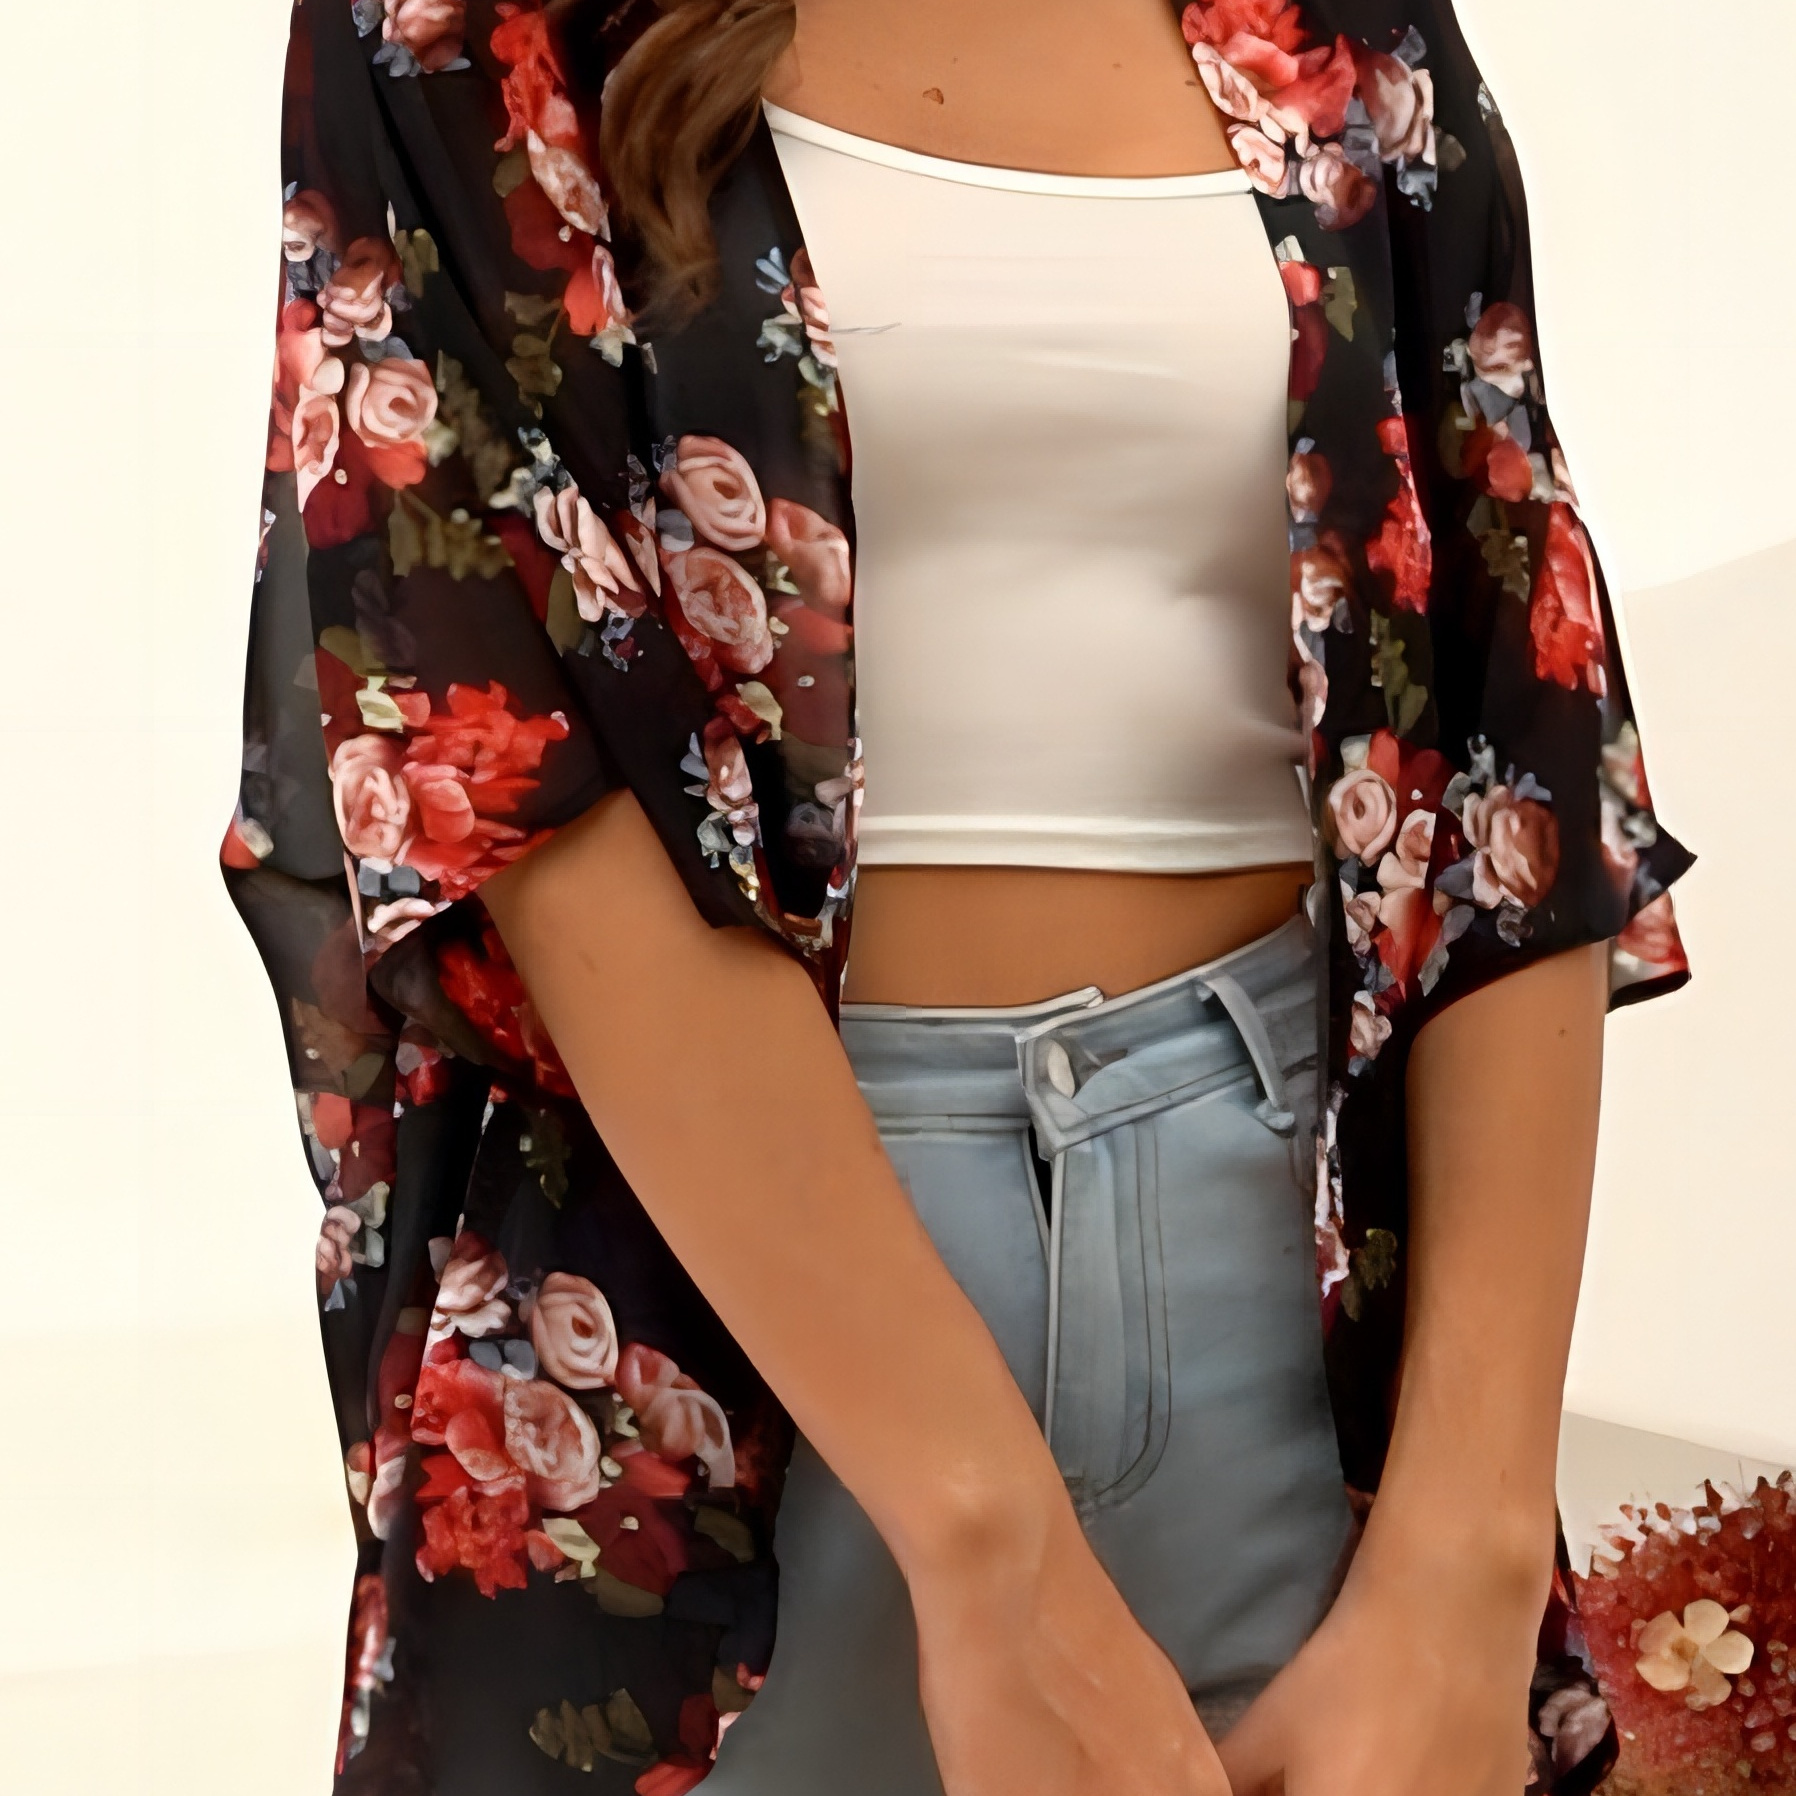 

Plus Size Casual Cover Up, Women's Plus Floral Print Bat Sleeve Cover Up Cardigan